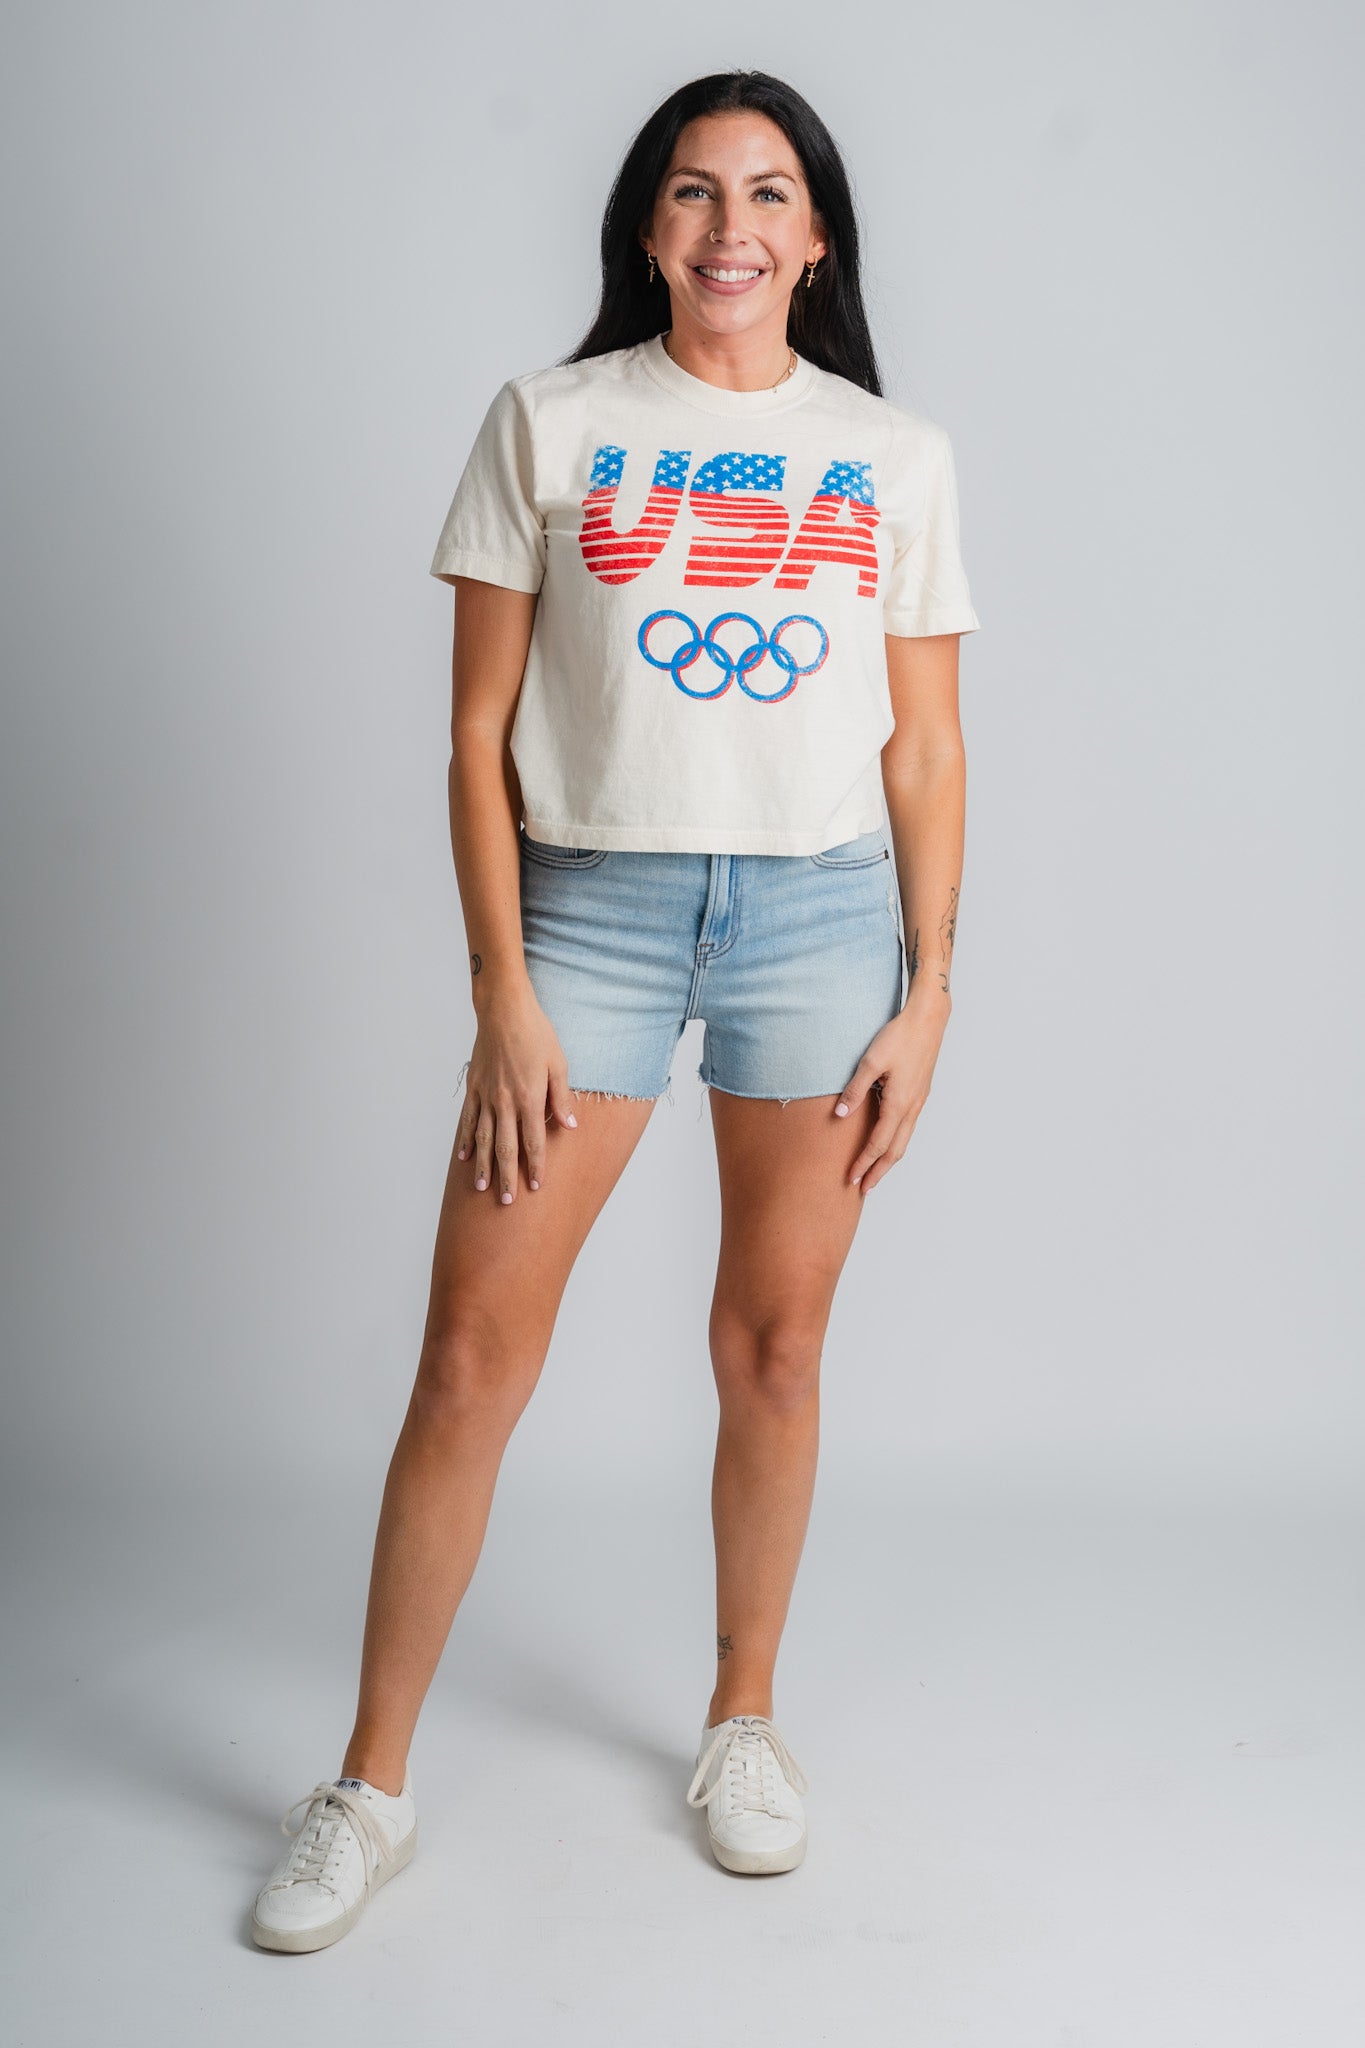 USA rings crop t-shirt - Stylish T-shirts - Trendy American Summer Fashion at Lush Fashion Lounge Boutique in Oklahoma